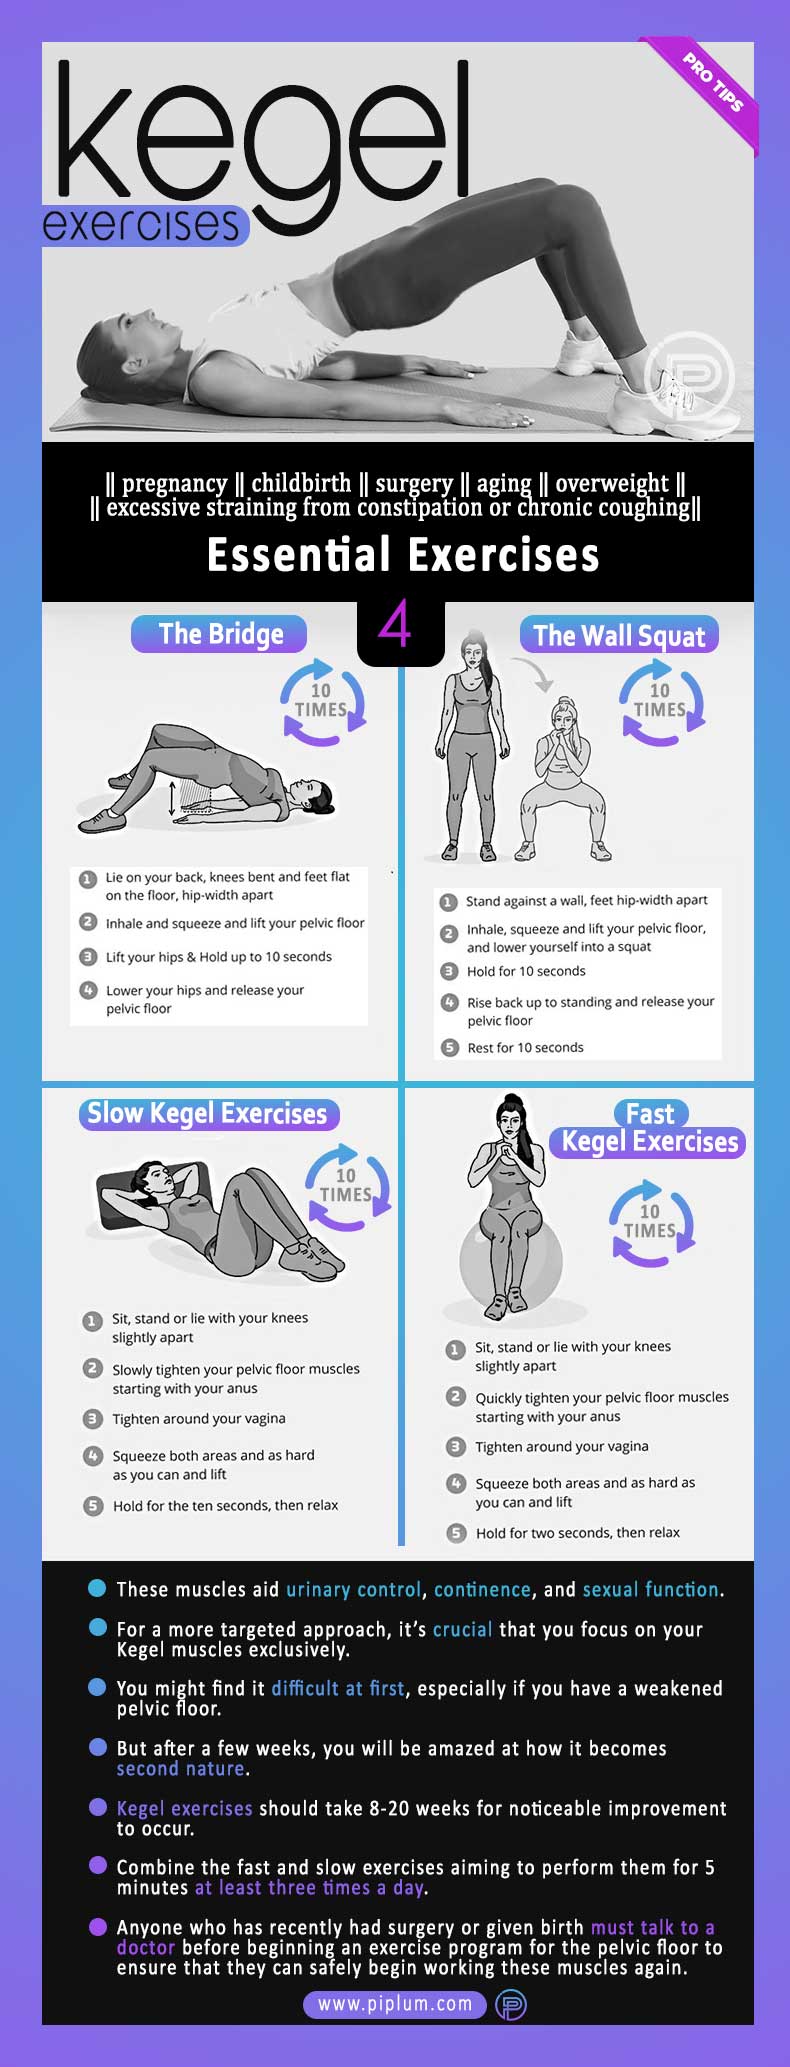 Kegel-Exercises-For-Women-During-Pregnancy-After-Childbirth-Surgery-Aging-Poster